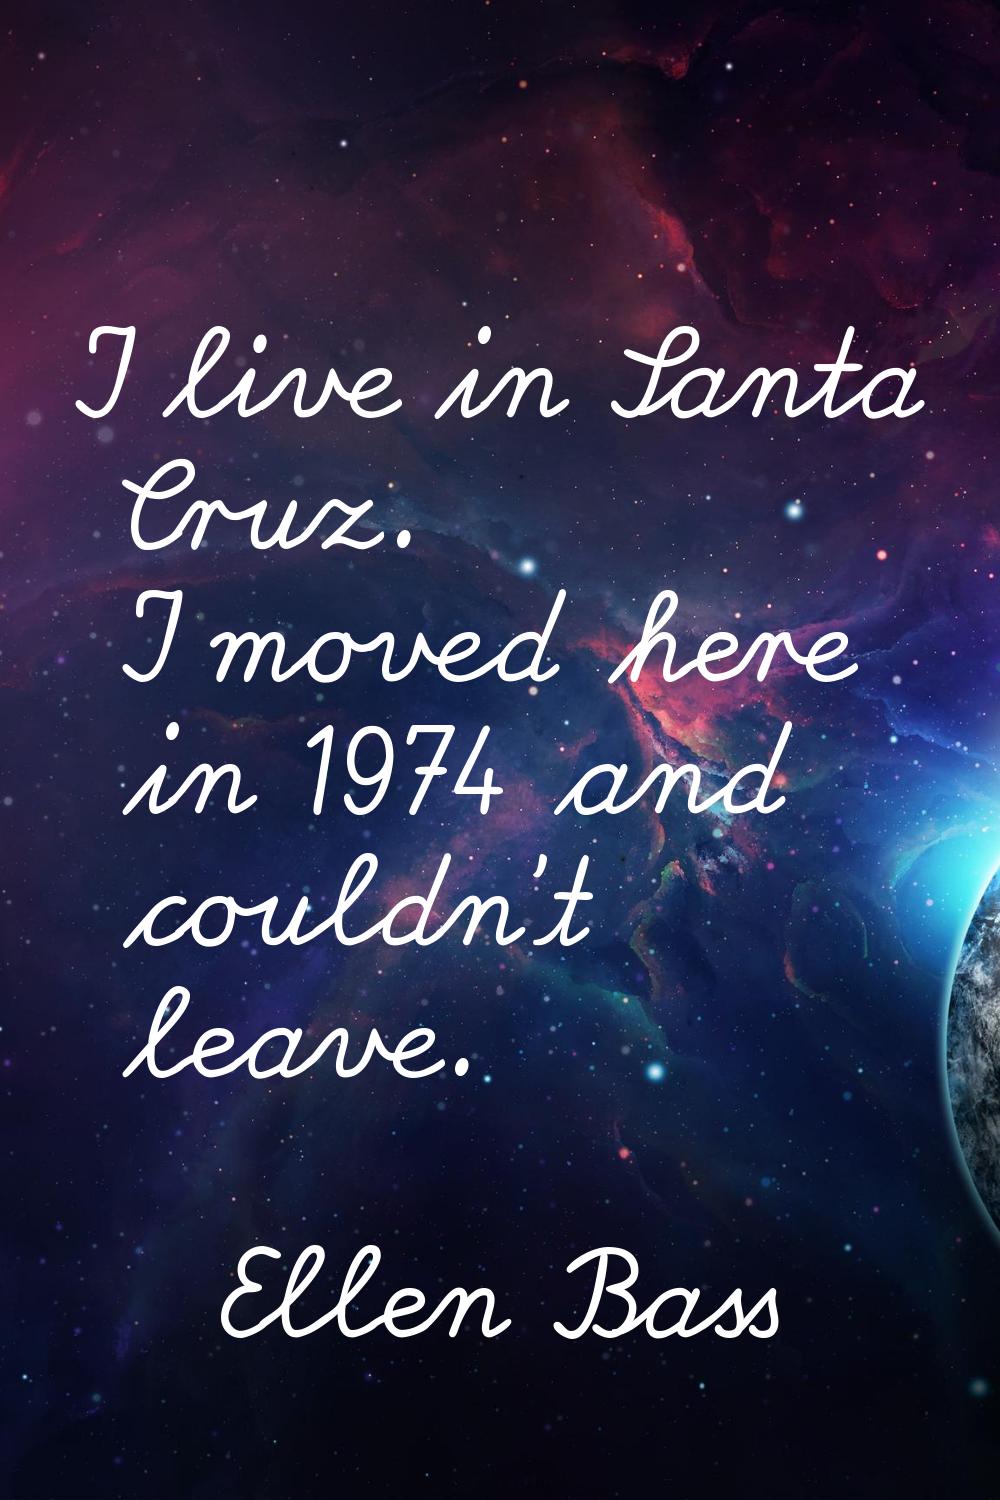 I live in Santa Cruz. I moved here in 1974 and couldn't leave.